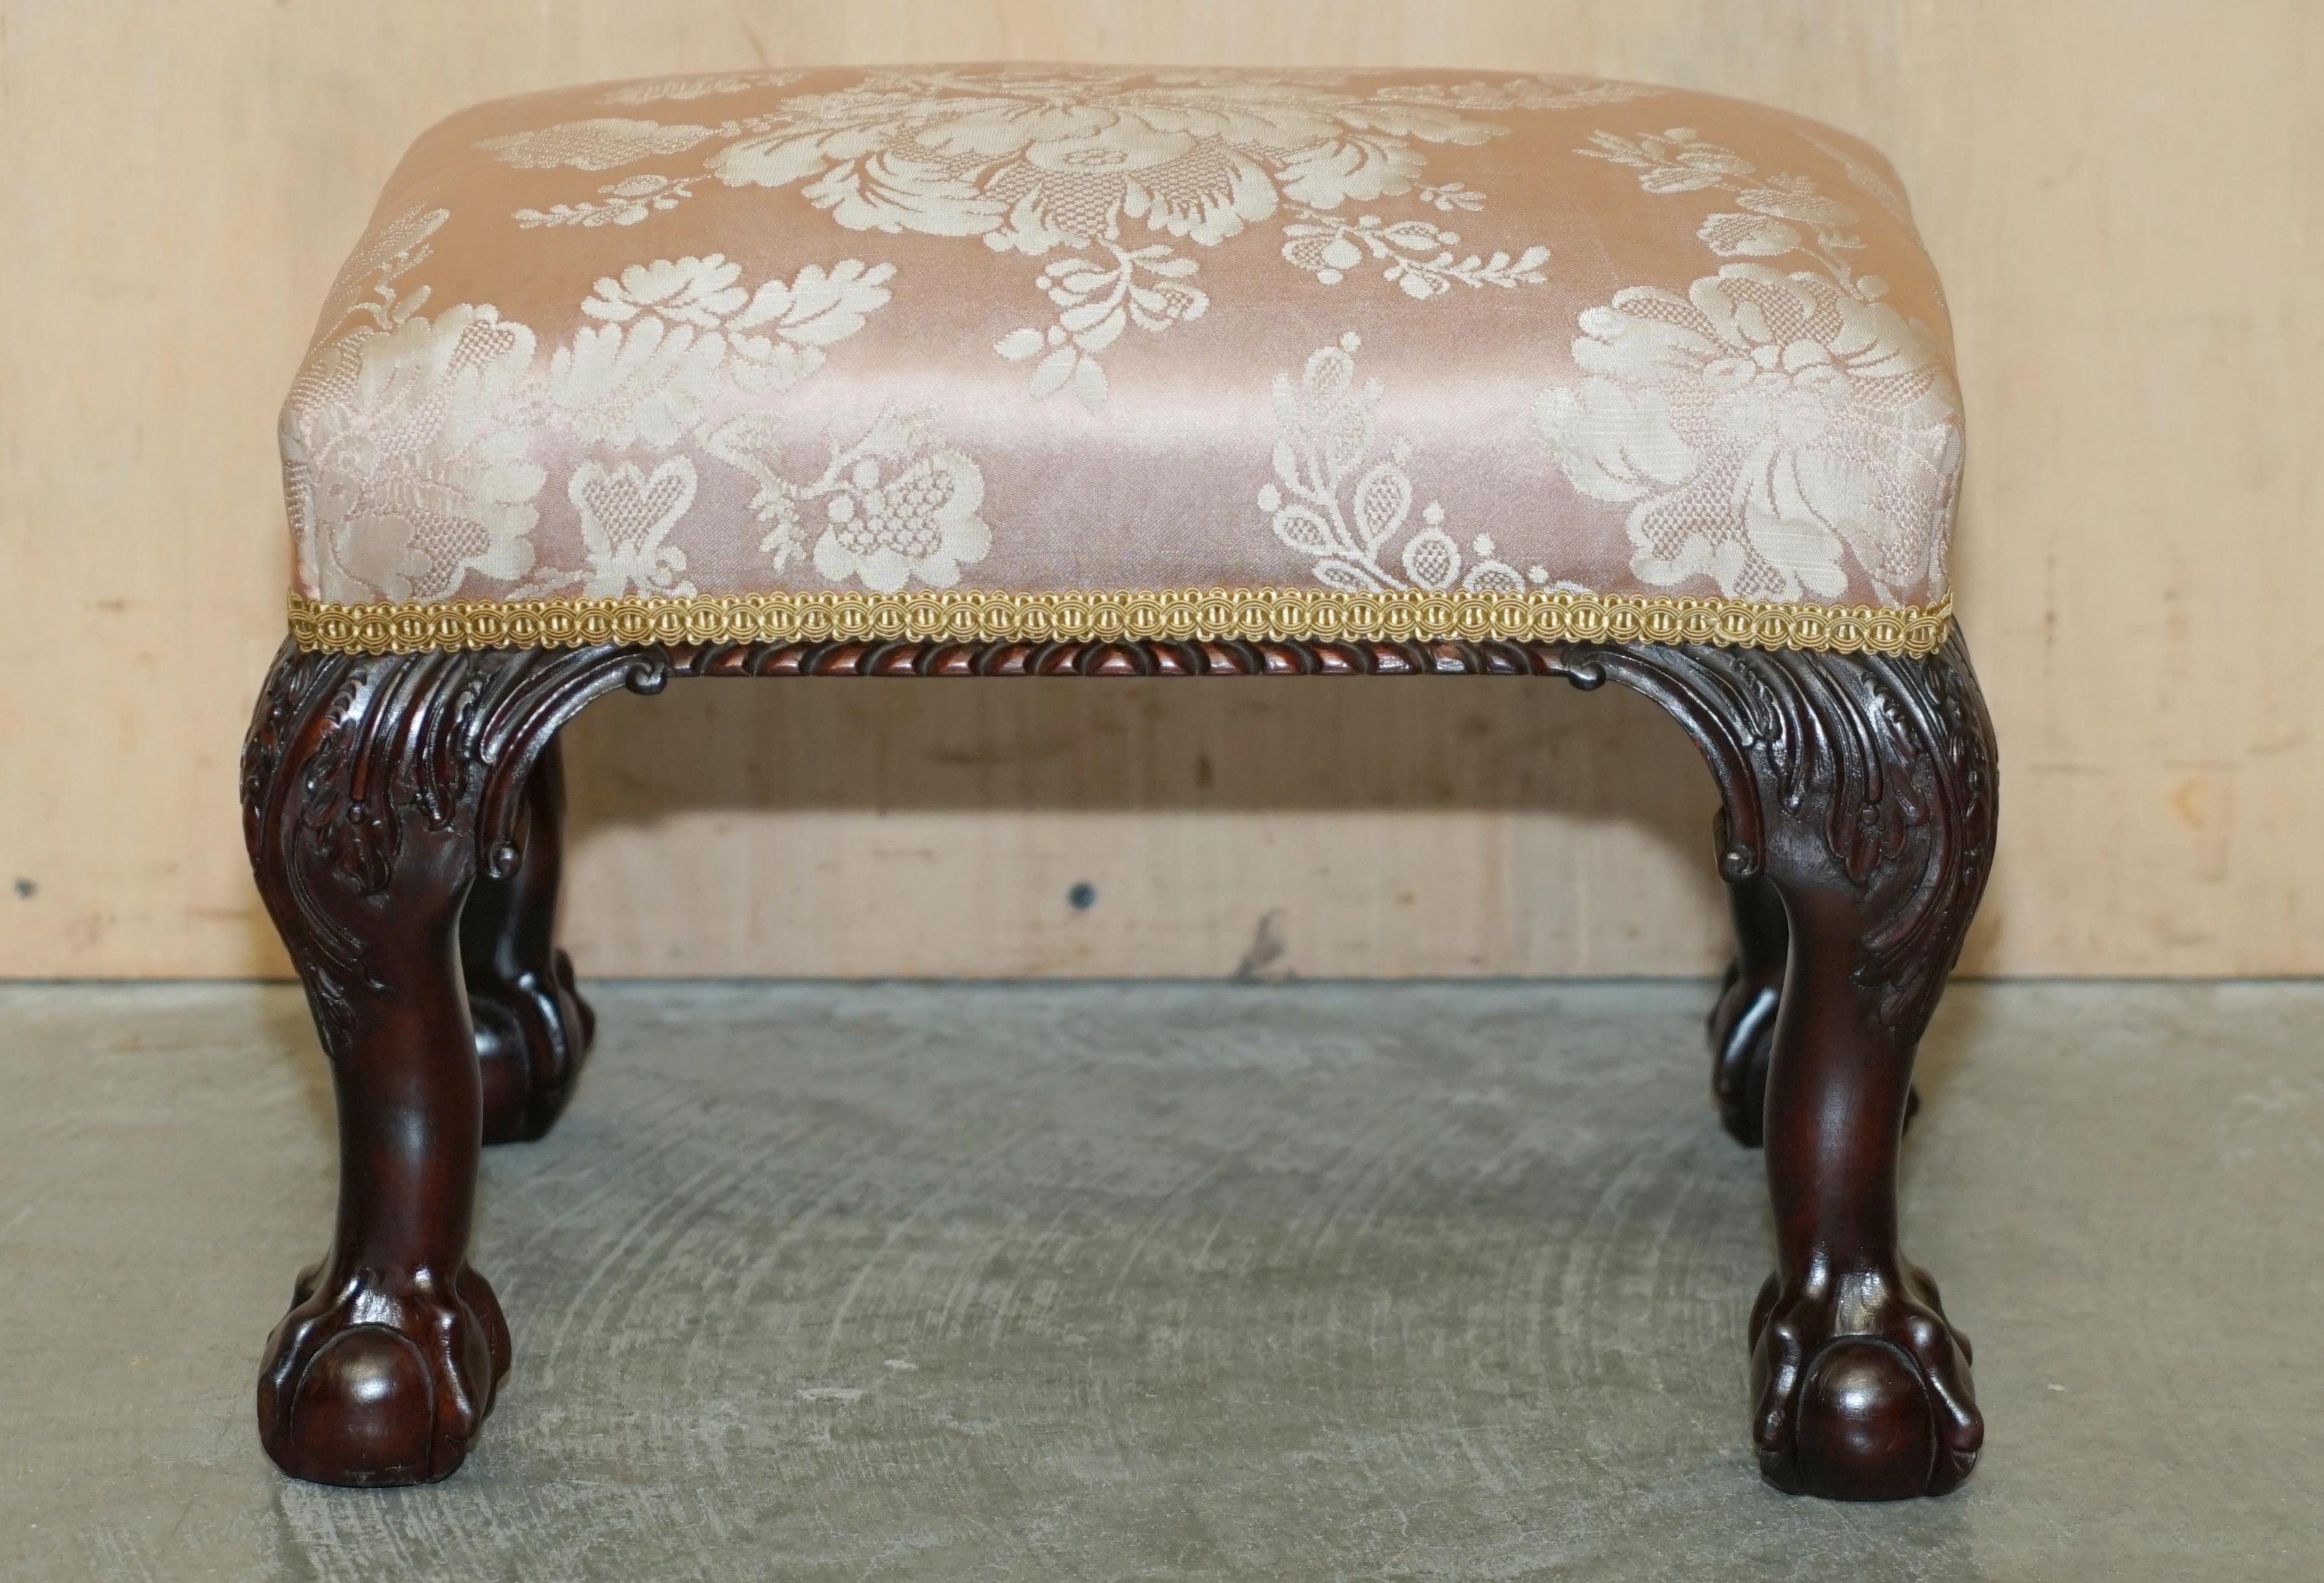 SUBLIME PAiR VON ANTIQUE VICTORIAN CLAW & BALL HARDWOOD FRAMED SMALL FOOTSTOOLS im Angebot 13